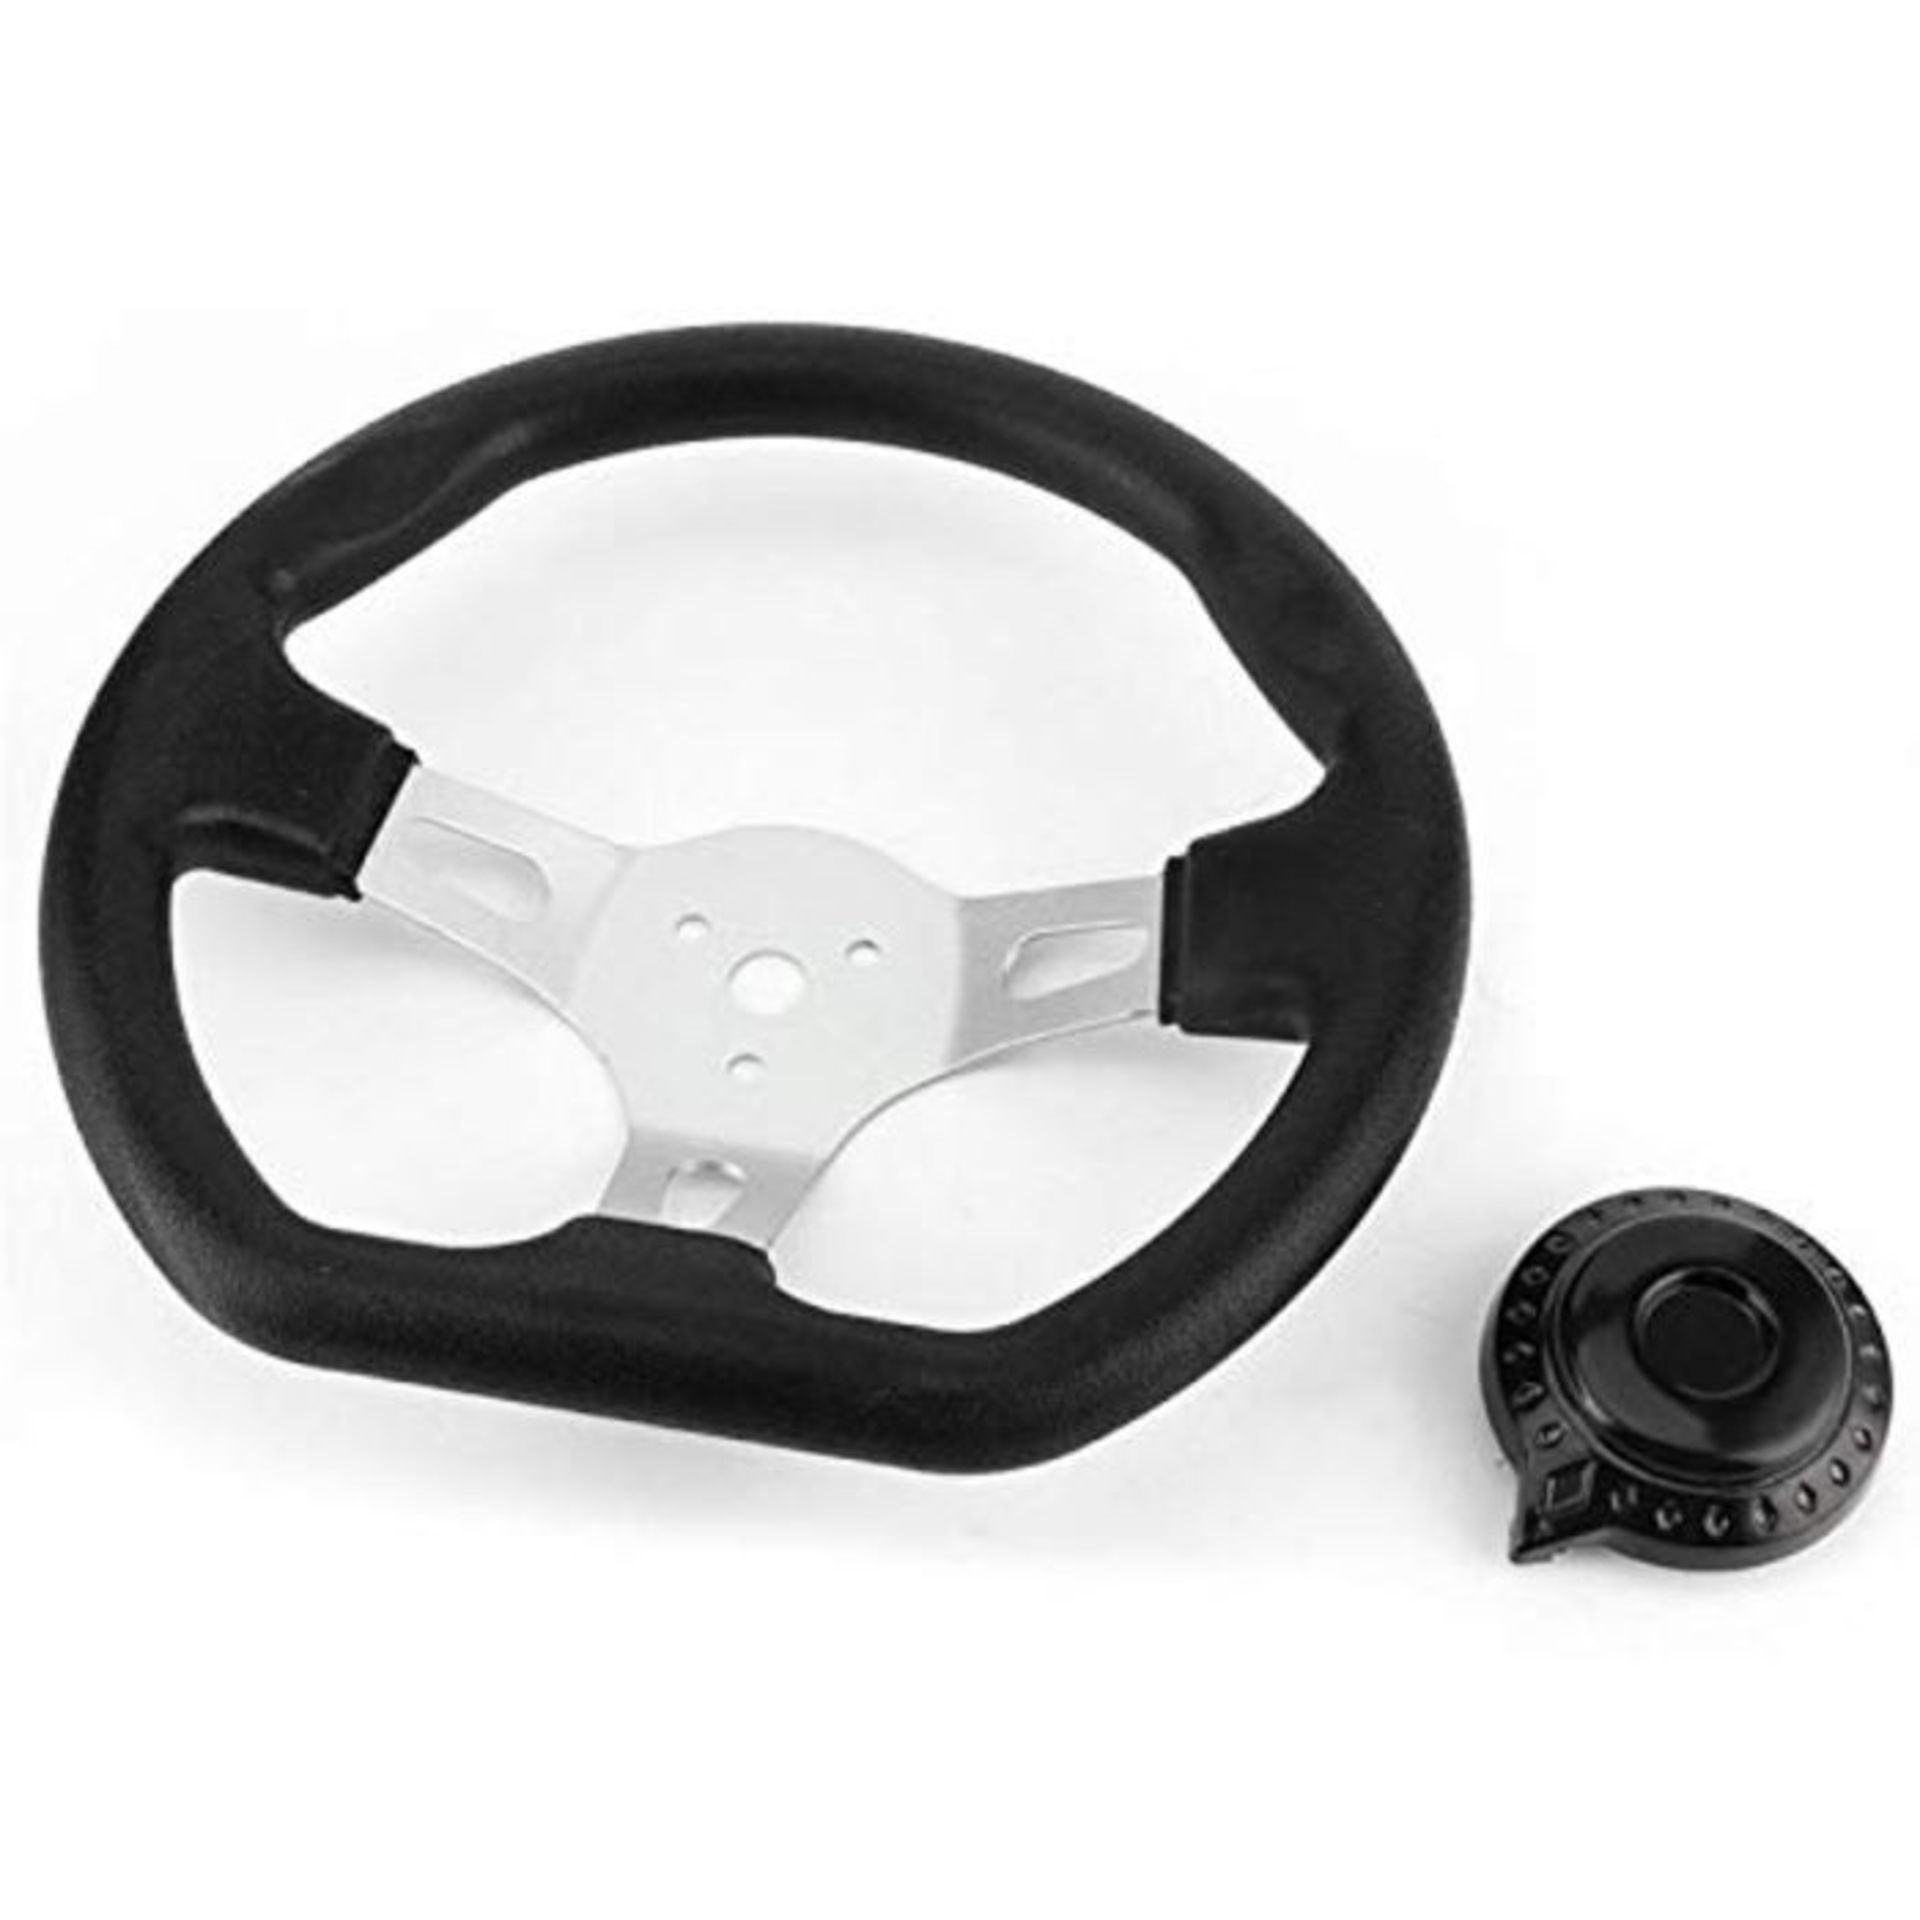 Summer Enjoyment Go-Kart Steering Wheel, Cool Personality Easy To Install Improve Safe